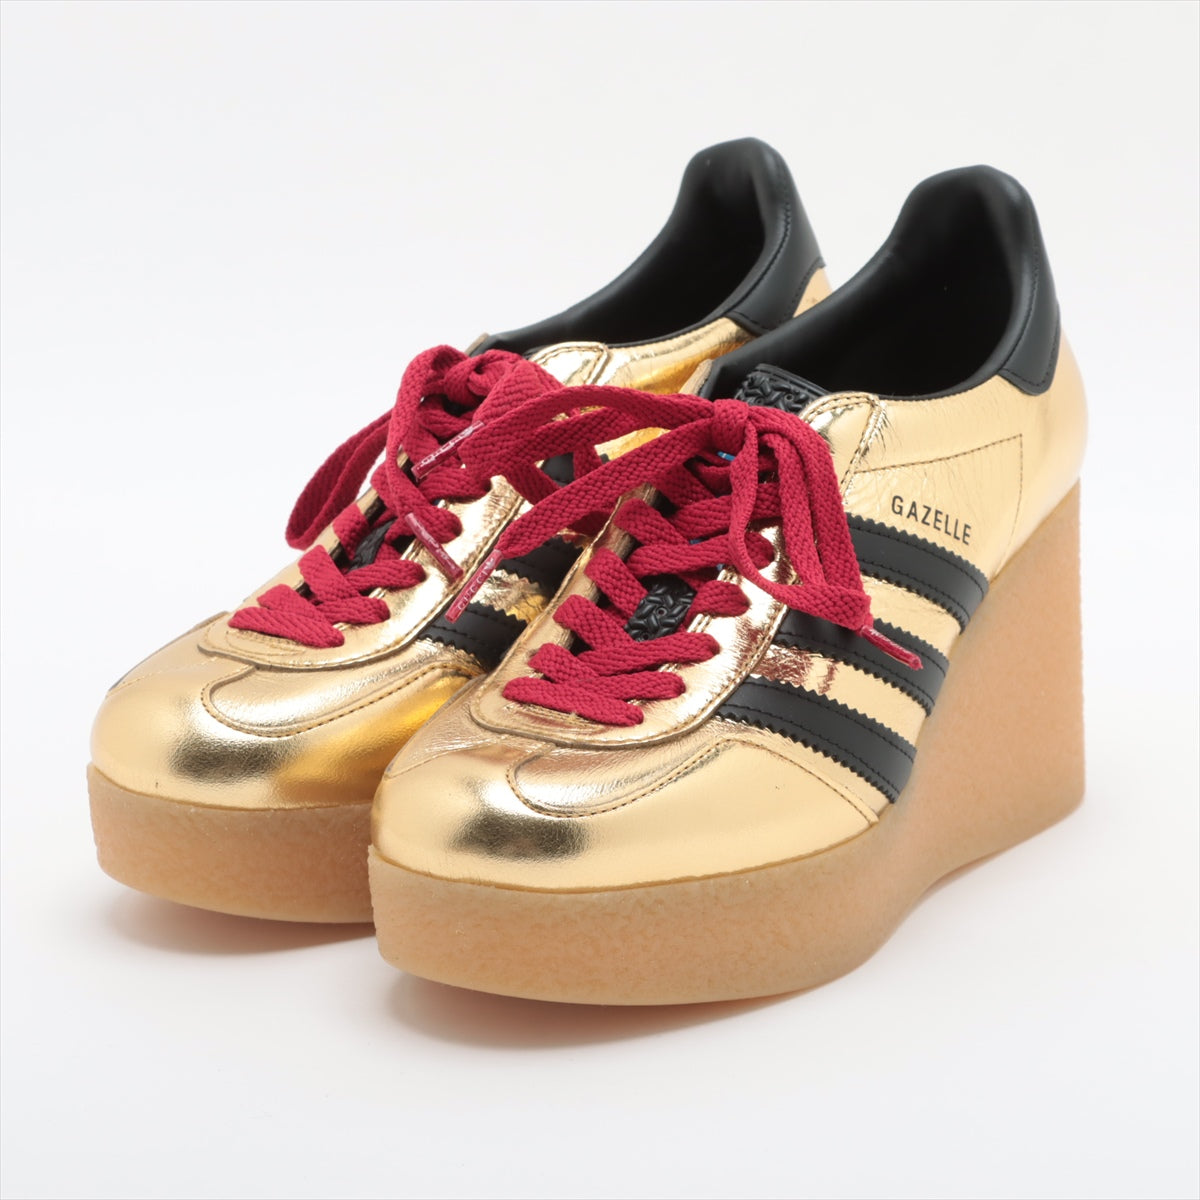 Gucci x adidas Gazelle Patent leather Sneakers EU36 Ladies' gold×black 725628 Wedge soles Is there a replacement string box There is a bag